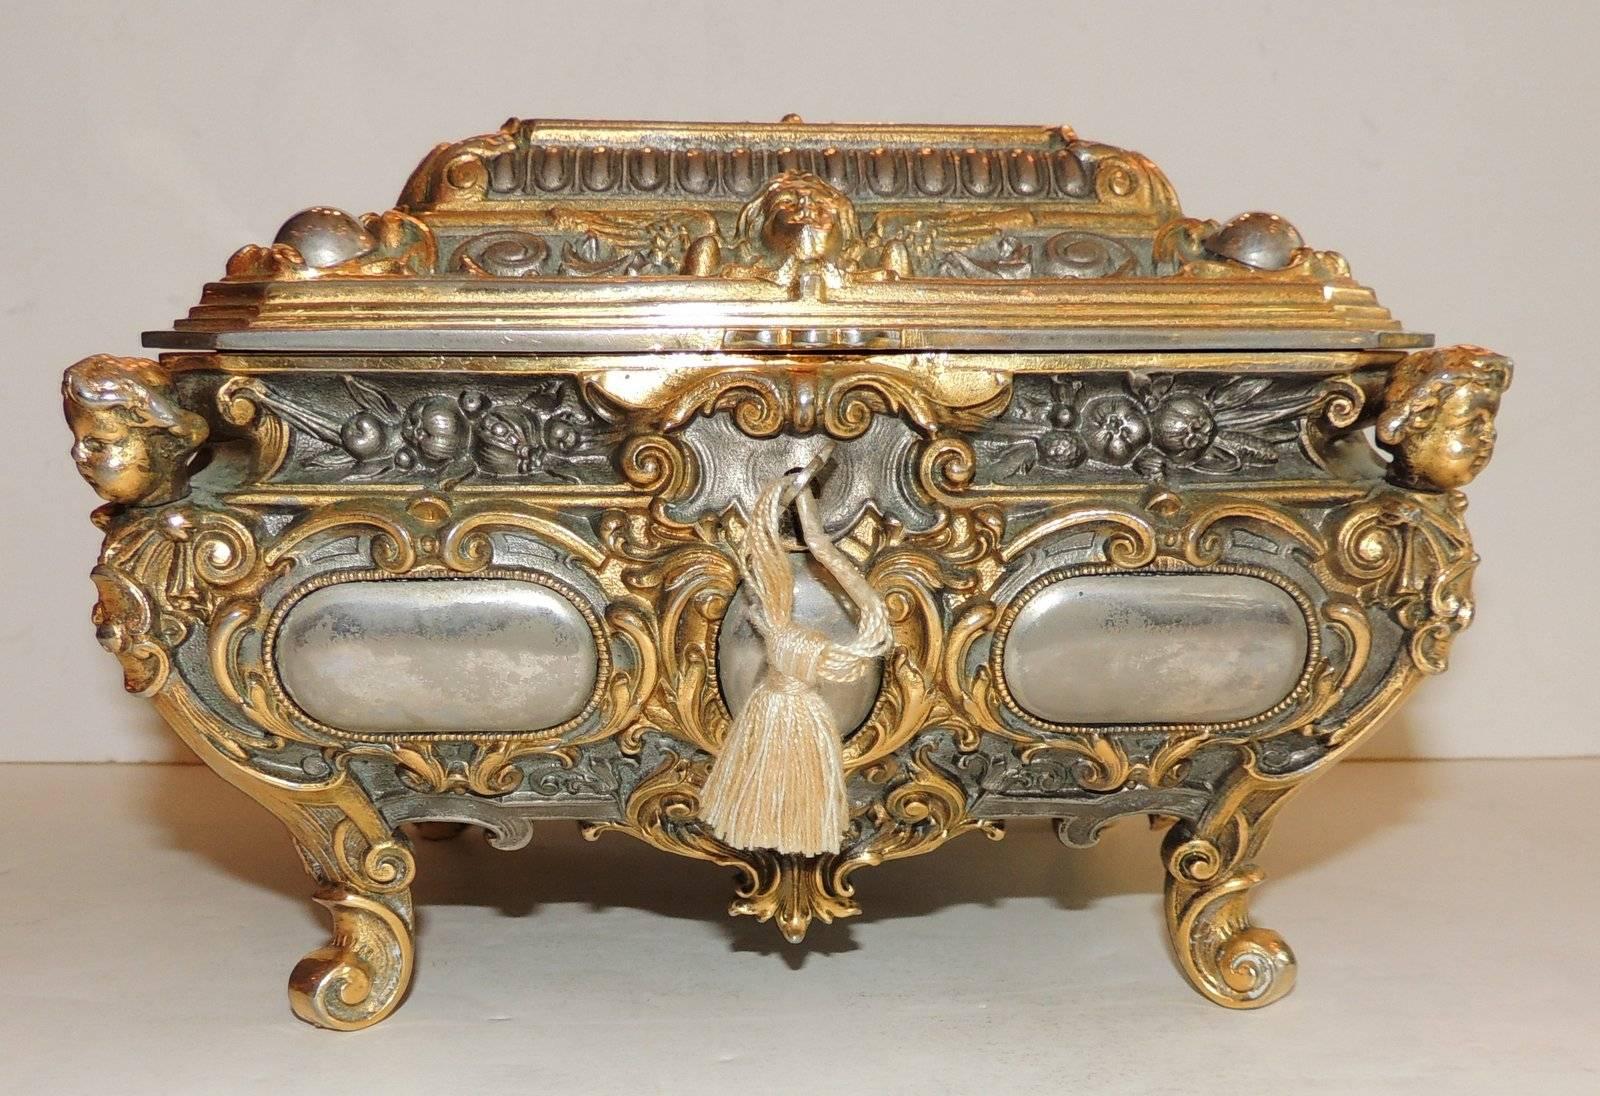 A very ornate rectangular casket with rich cherub ormolu corner mounts with scroll feet, floral bouquets and a winged cherub mask escutcheon on top the hinged cover. Silver medallions surround the corners of the box and rich blue velvet lines the